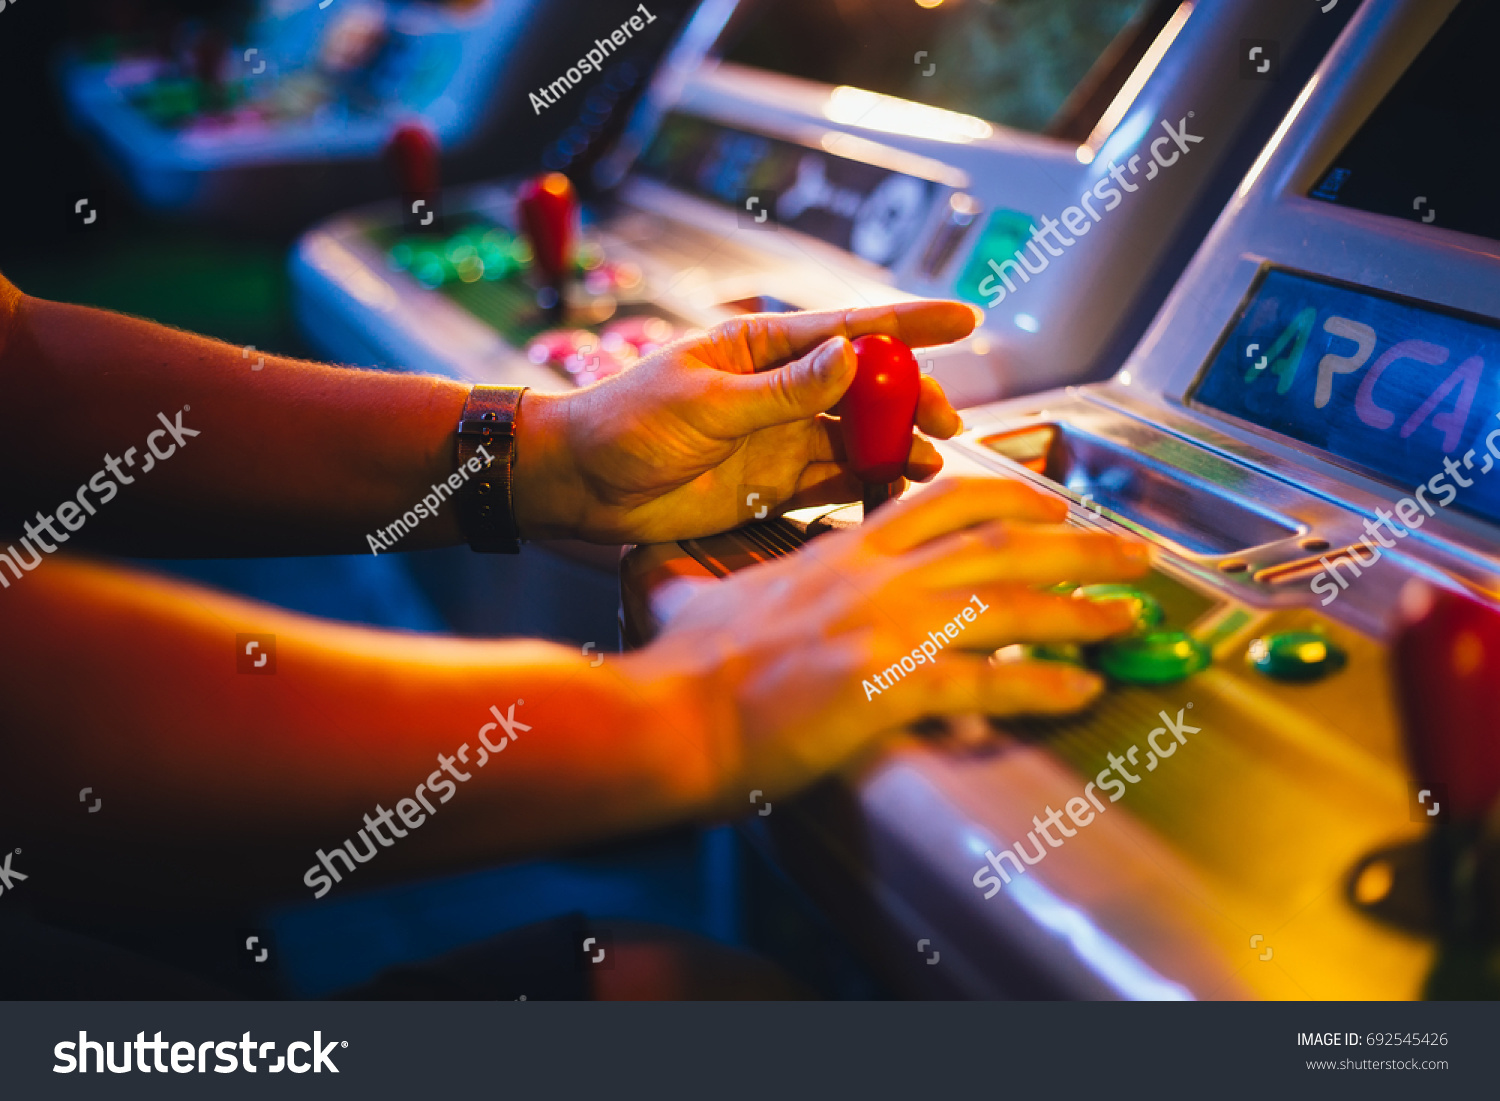 Detail on Hands with Arcade Joystick Playing Old Arcade Video Game #692545426